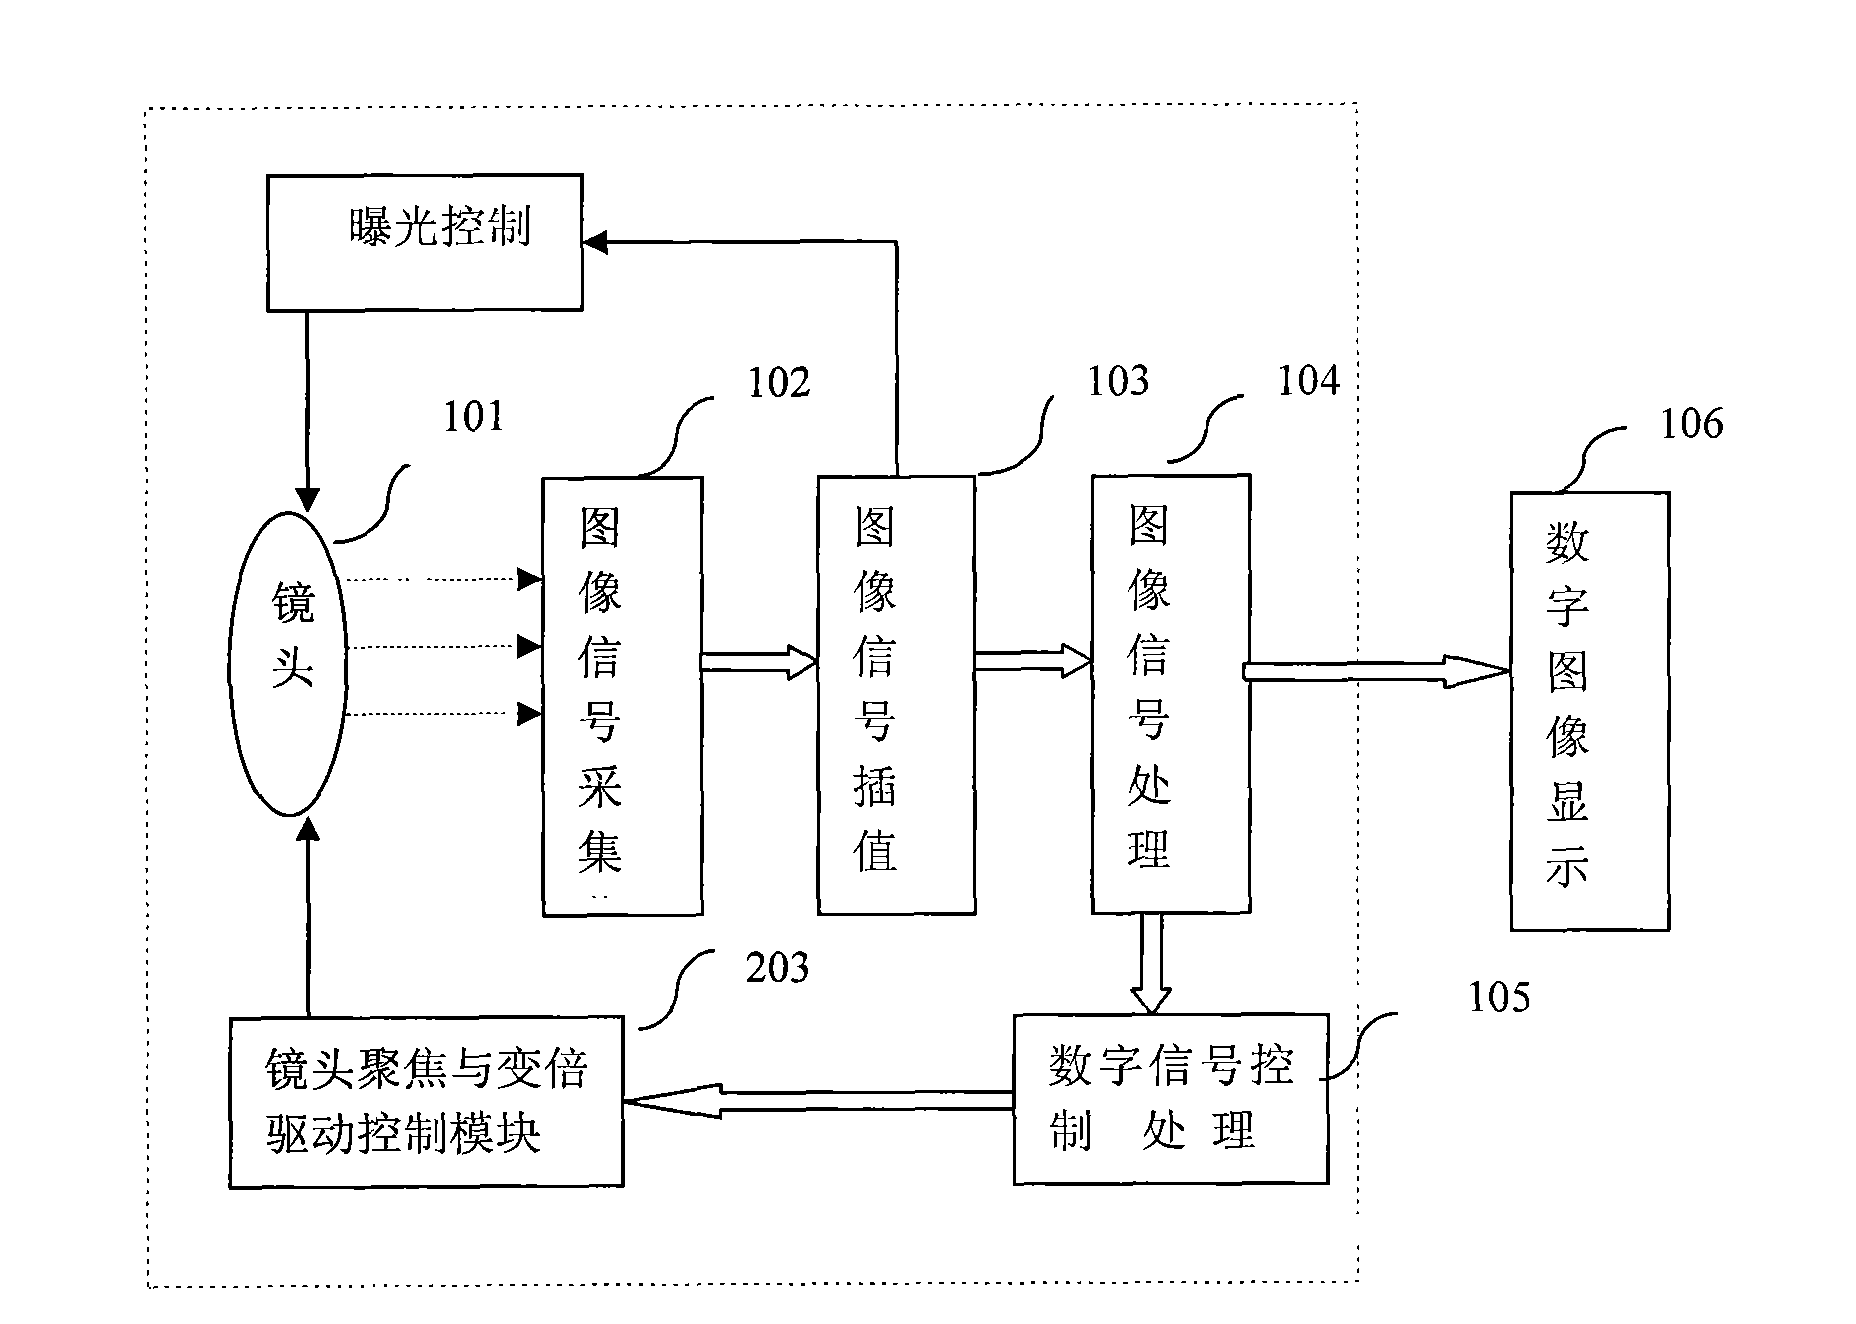 Integrated camera device and self-adapting automatic focus method